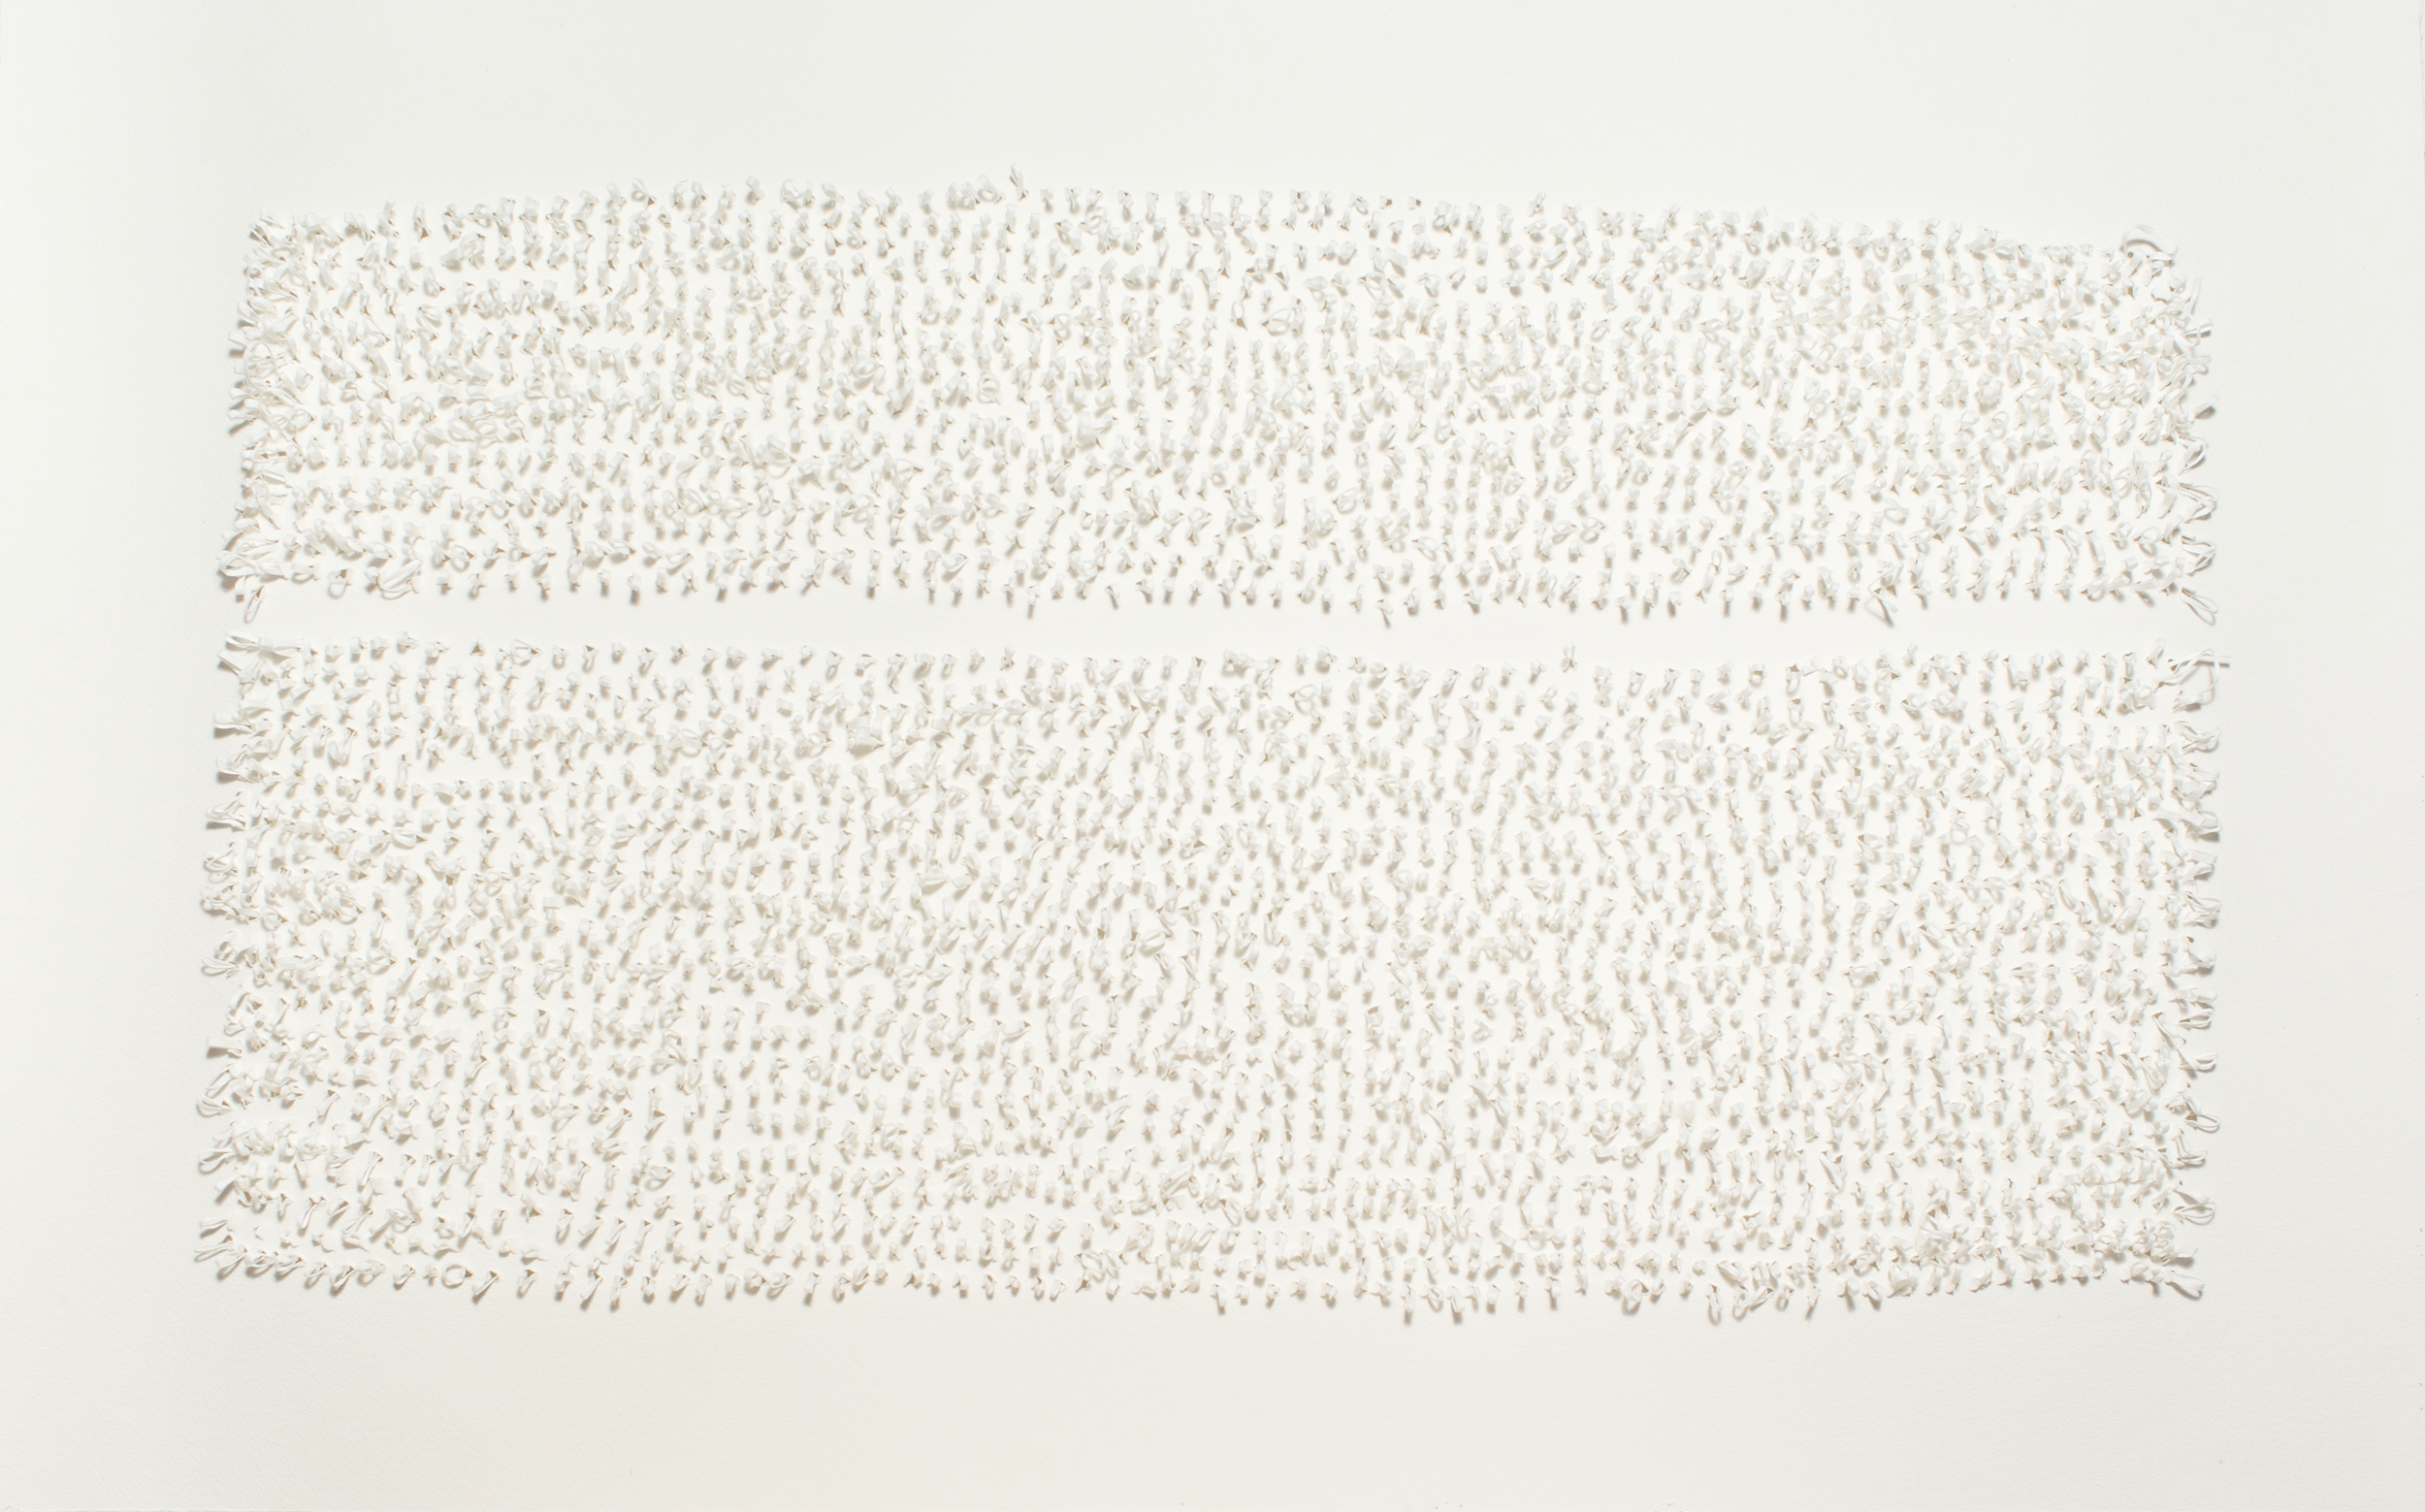  Tufting is a technique traditionally used through open weave fabric for rug making. These 3 dimensional wall pieces are created using the same tufting form through cotton paper.  yarn : cotton gima 